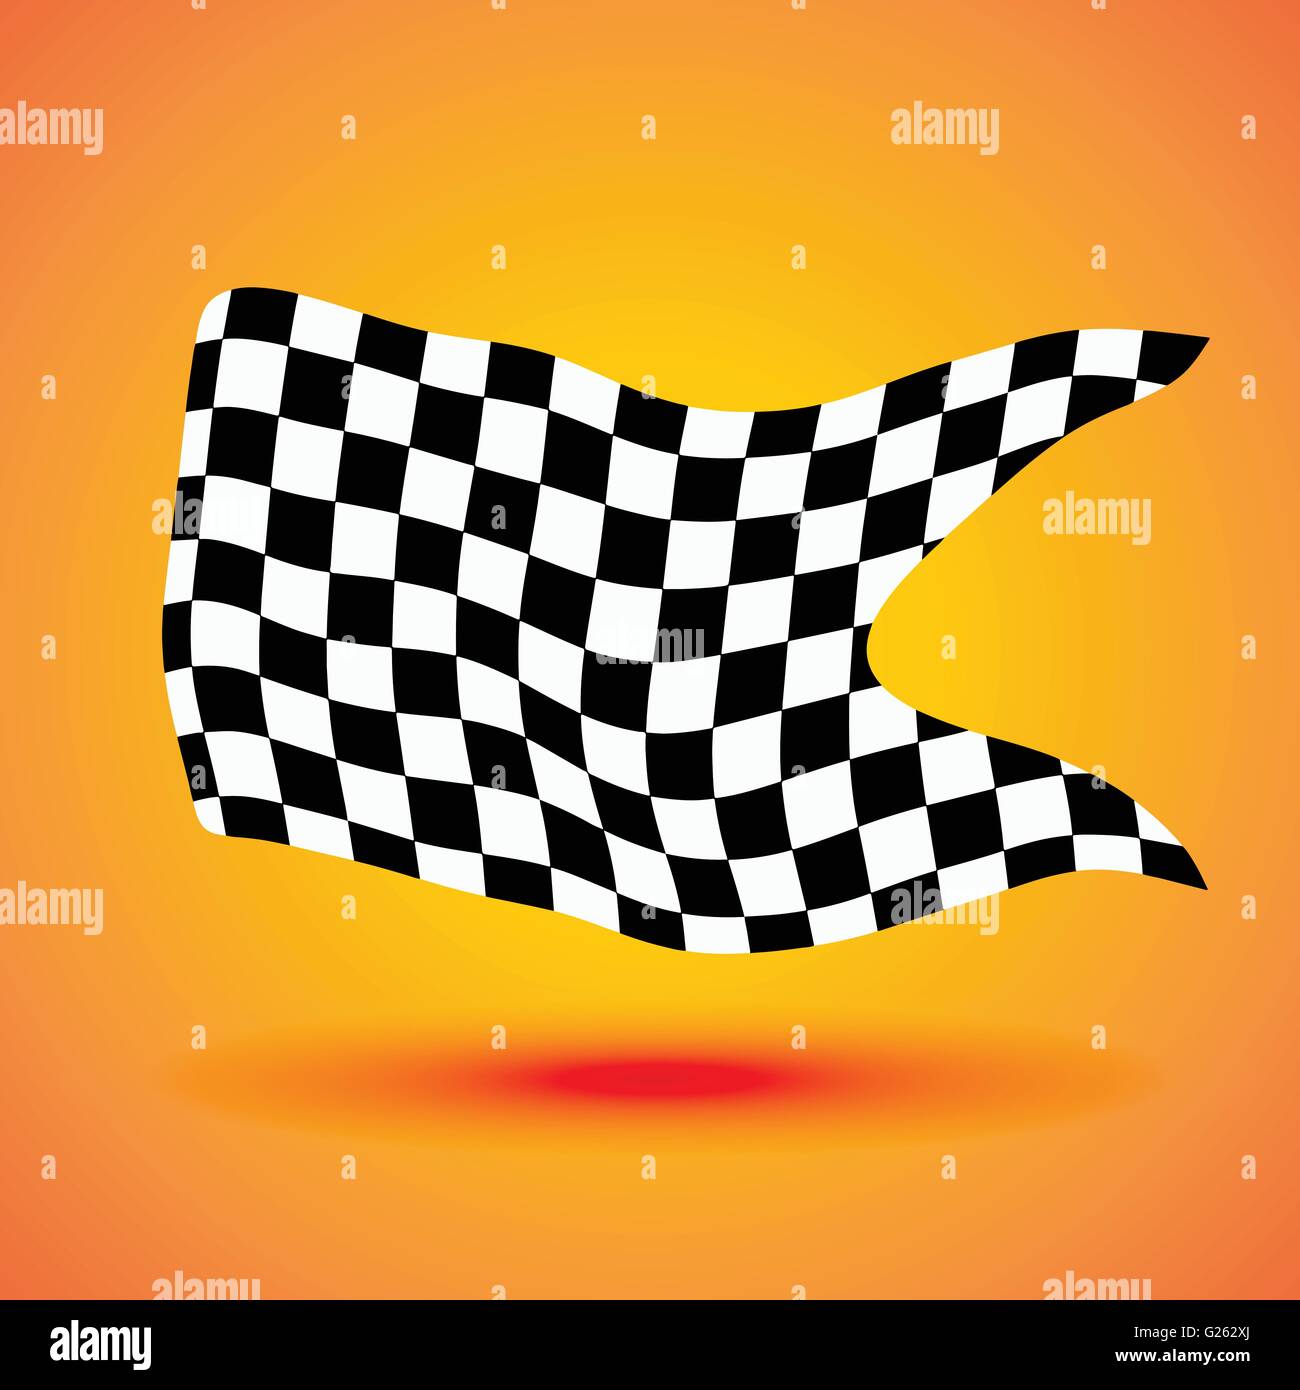 Racing background with checkered flag vector illustration Stock Vector